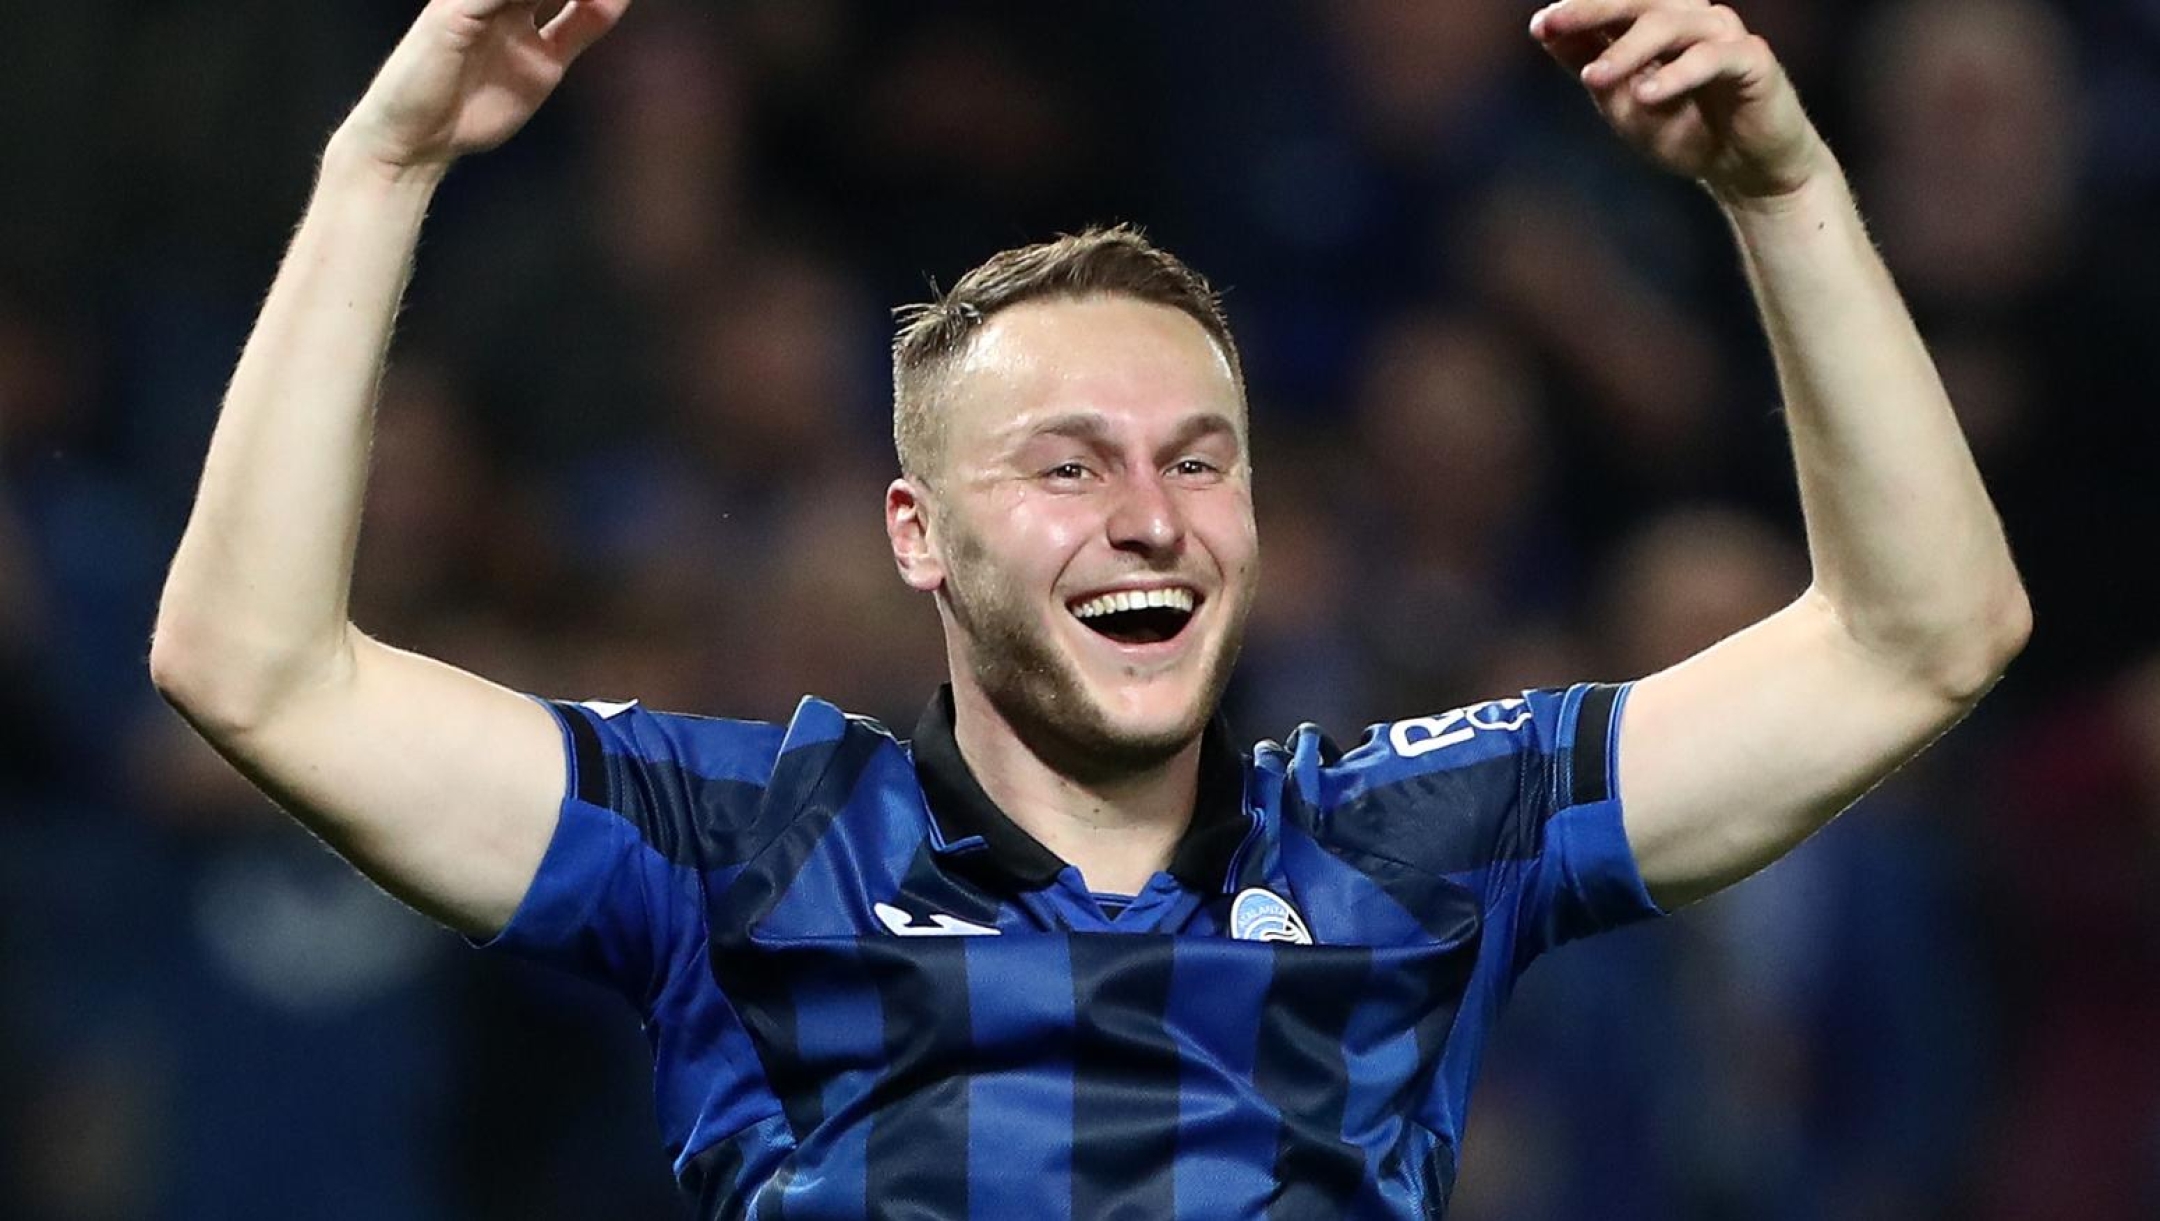 BERGAMO, ITALY - MAY 09: Teun Koopmeiners of Atalanta BC celebrates after the team's victory and reaching the UEFA Europa League Final following the UEFA Europa League 2023/24 Semi-Final second leg match between Atalanta BC and Olympique de Marseille at Stadio Atleti Azzurri d'Italia on May 09, 2024 in Bergamo, Italy. (Photo by Marco Luzzani/Getty Images)